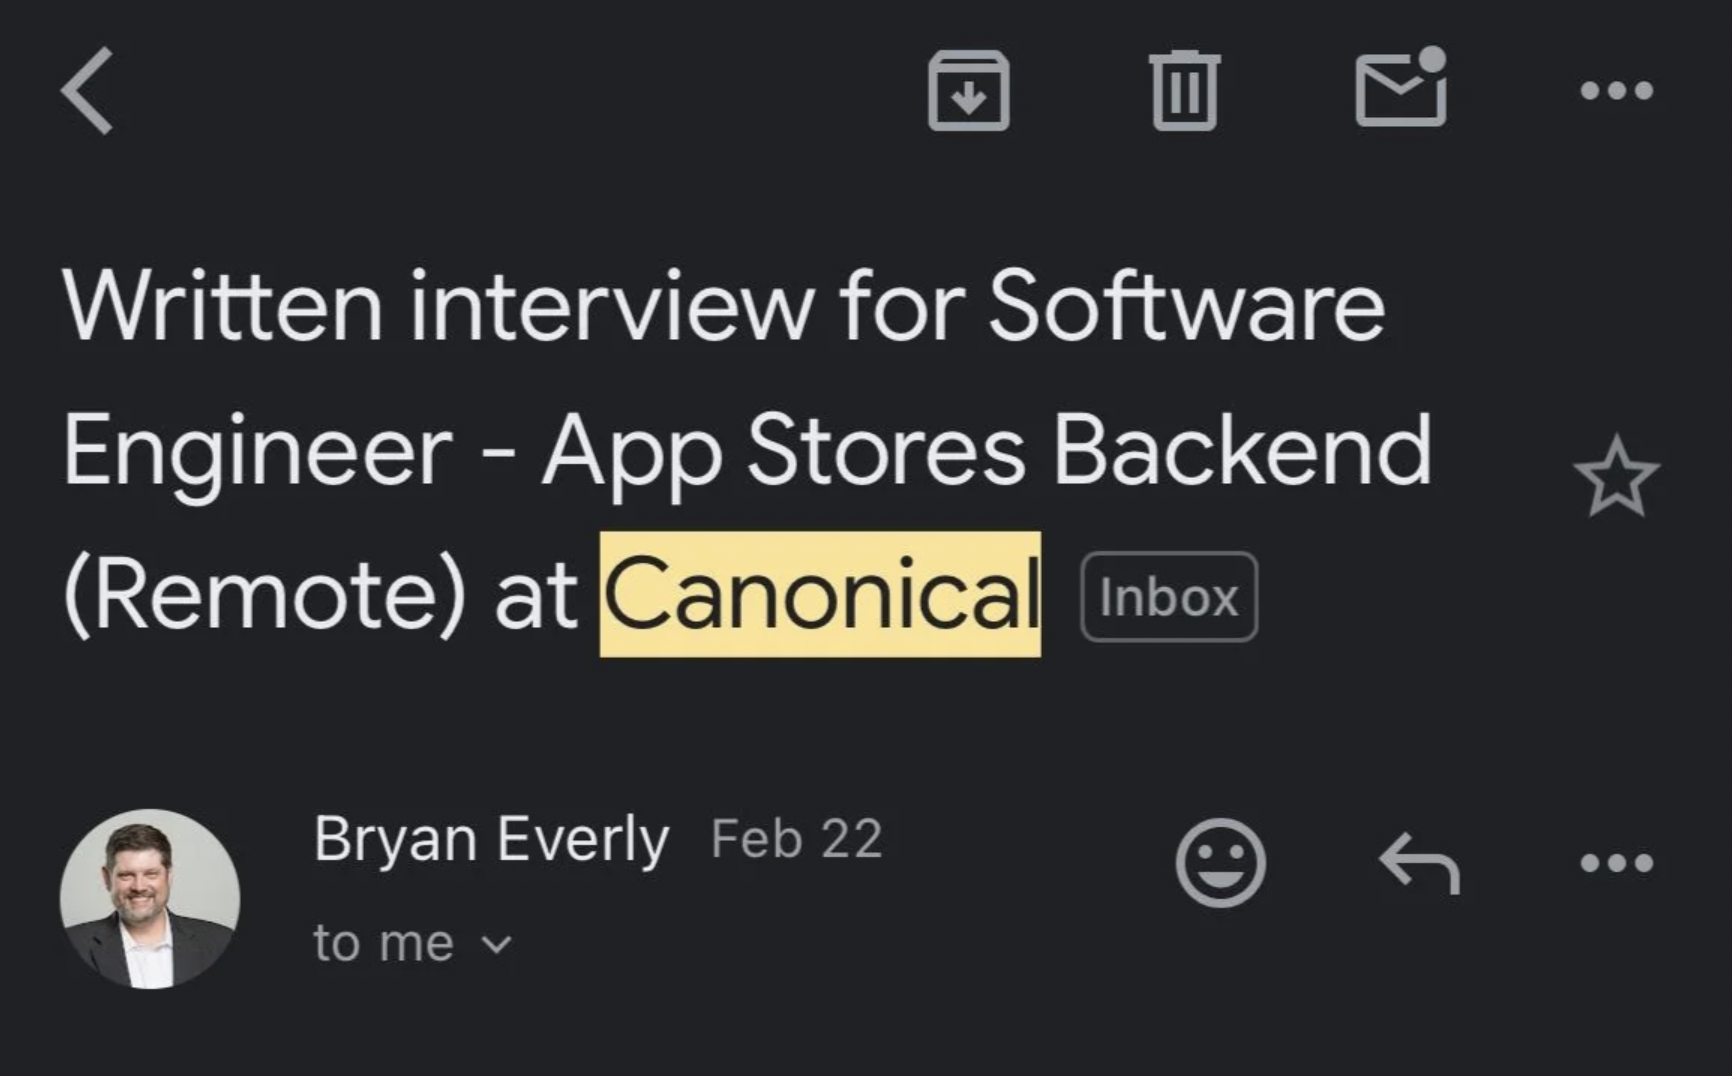 screenshot - Written interview for Software Engineer App Stores Backend Remote at Canonical Inbox Bryan Everly Feb 22 to me